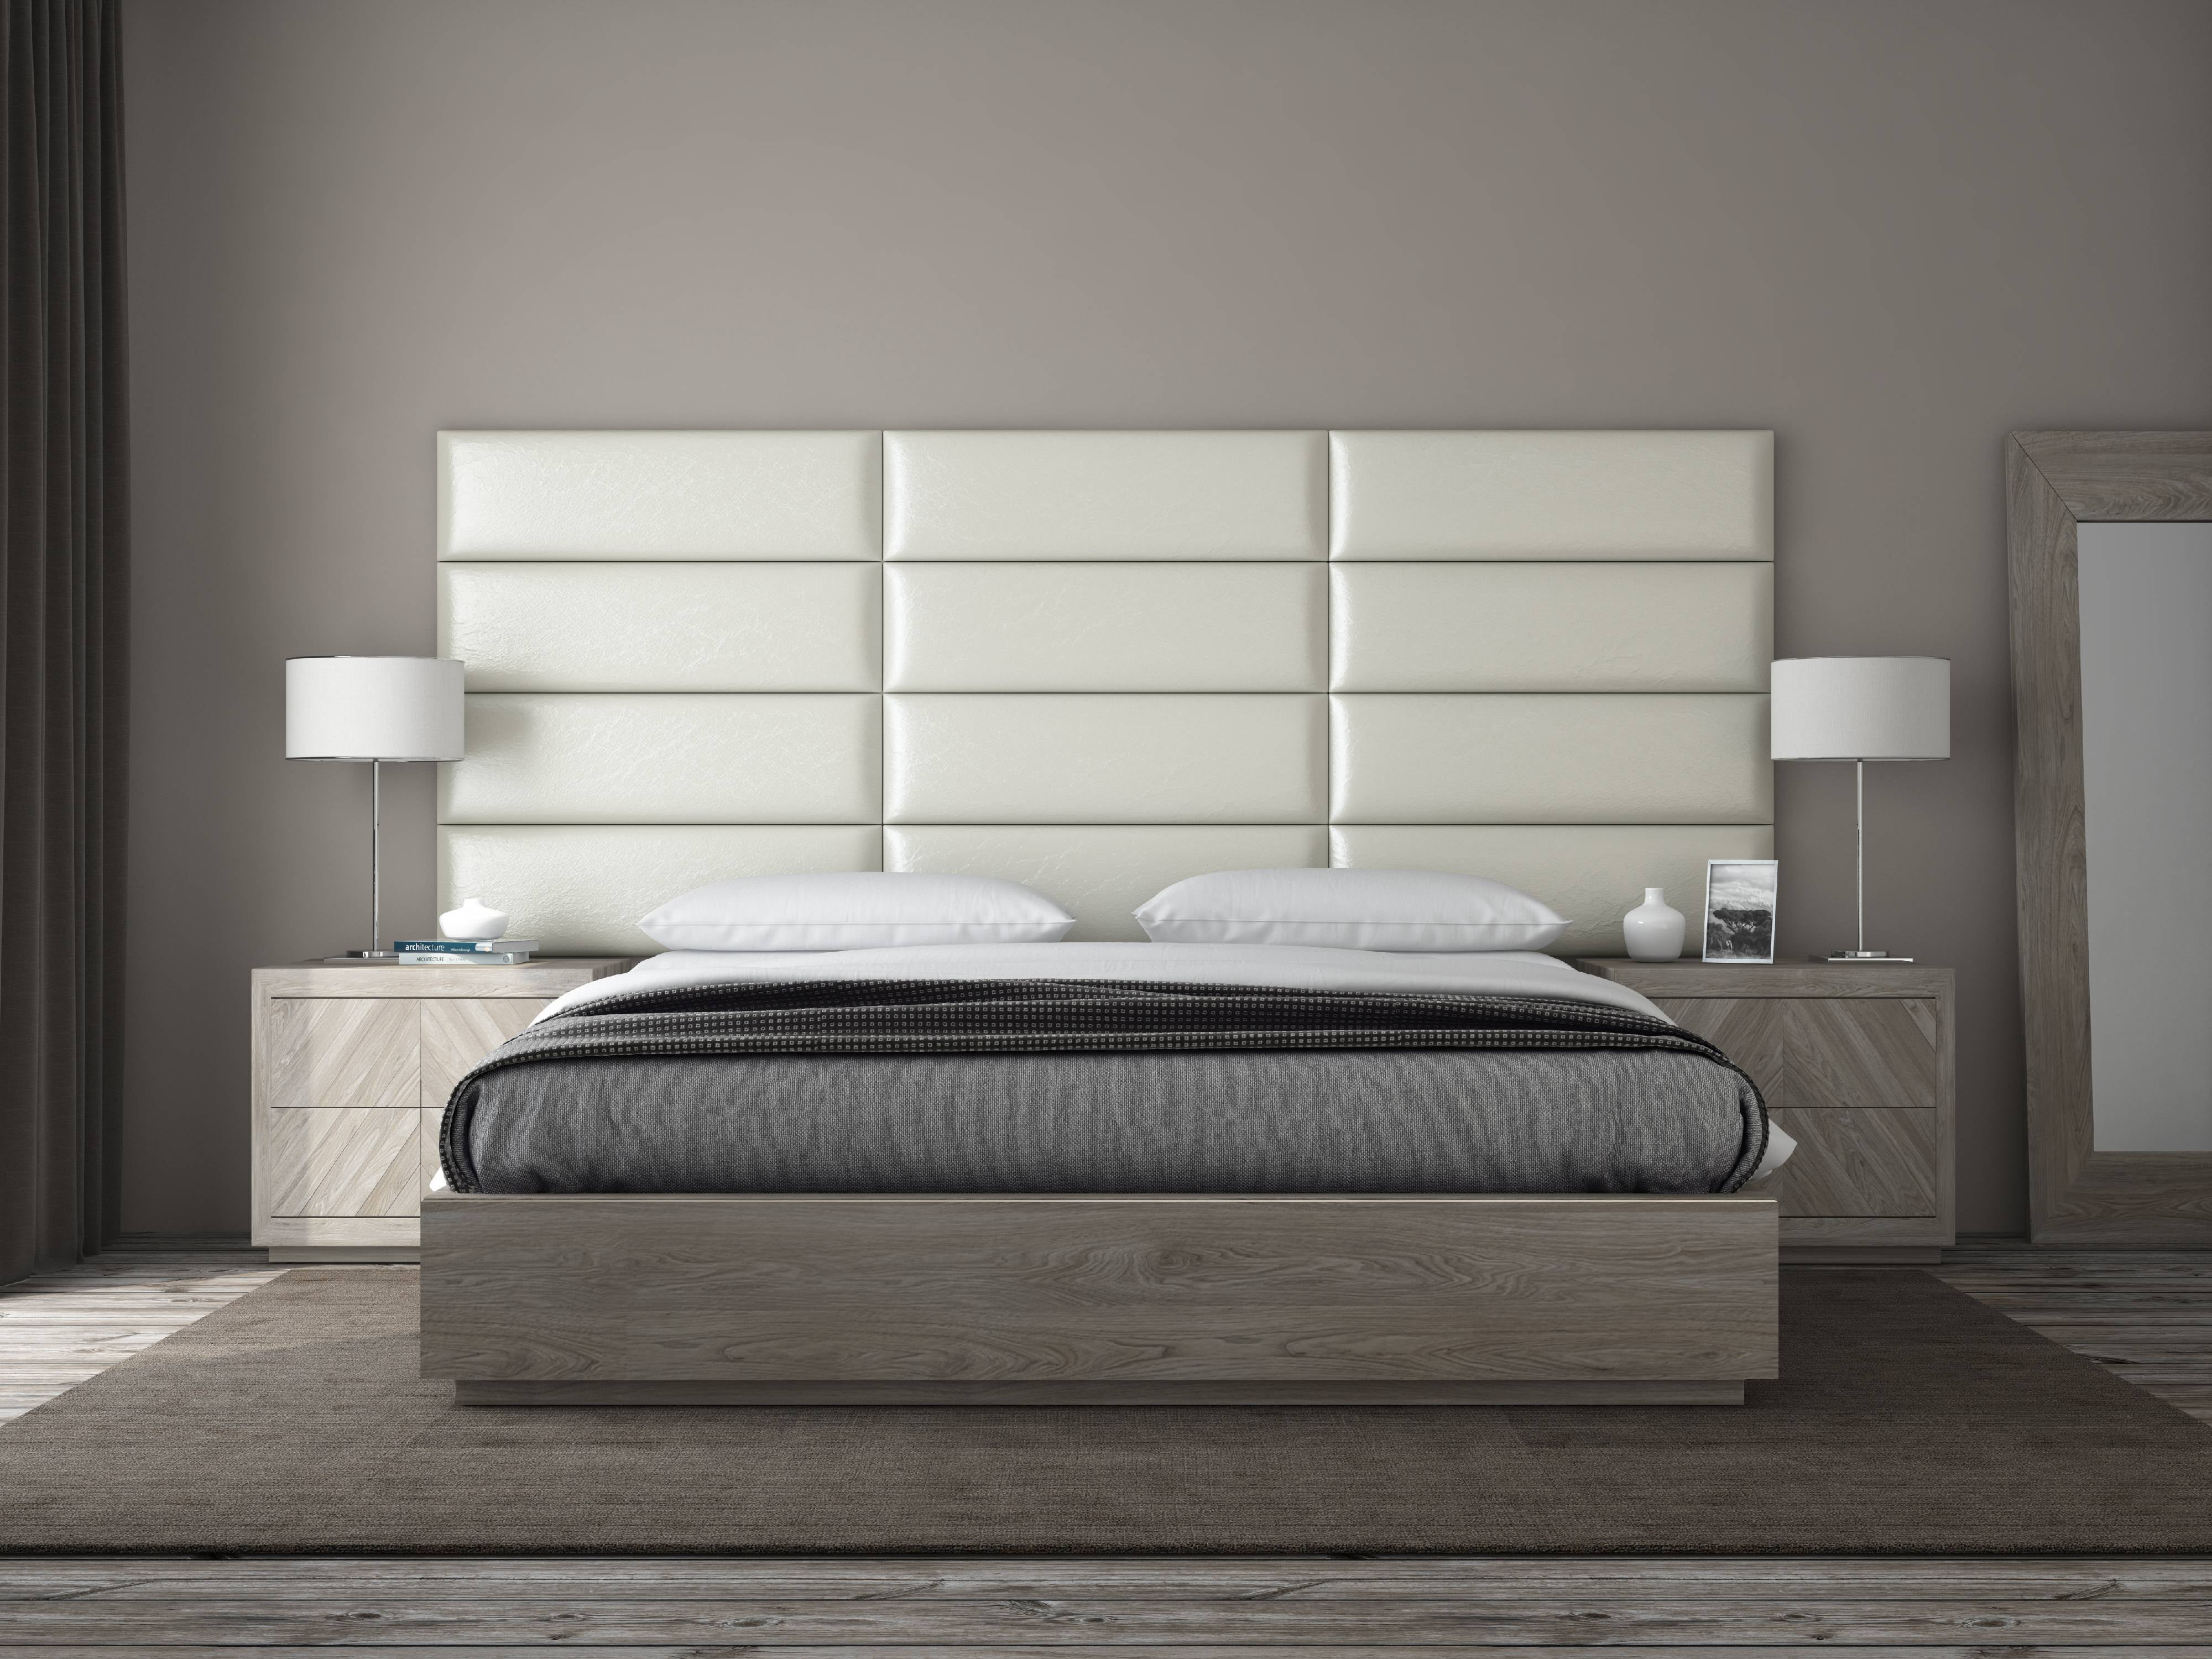 VANT Upholstered Headboards - Accent Wall Panels - Packs Of 4 - Deluxe ...